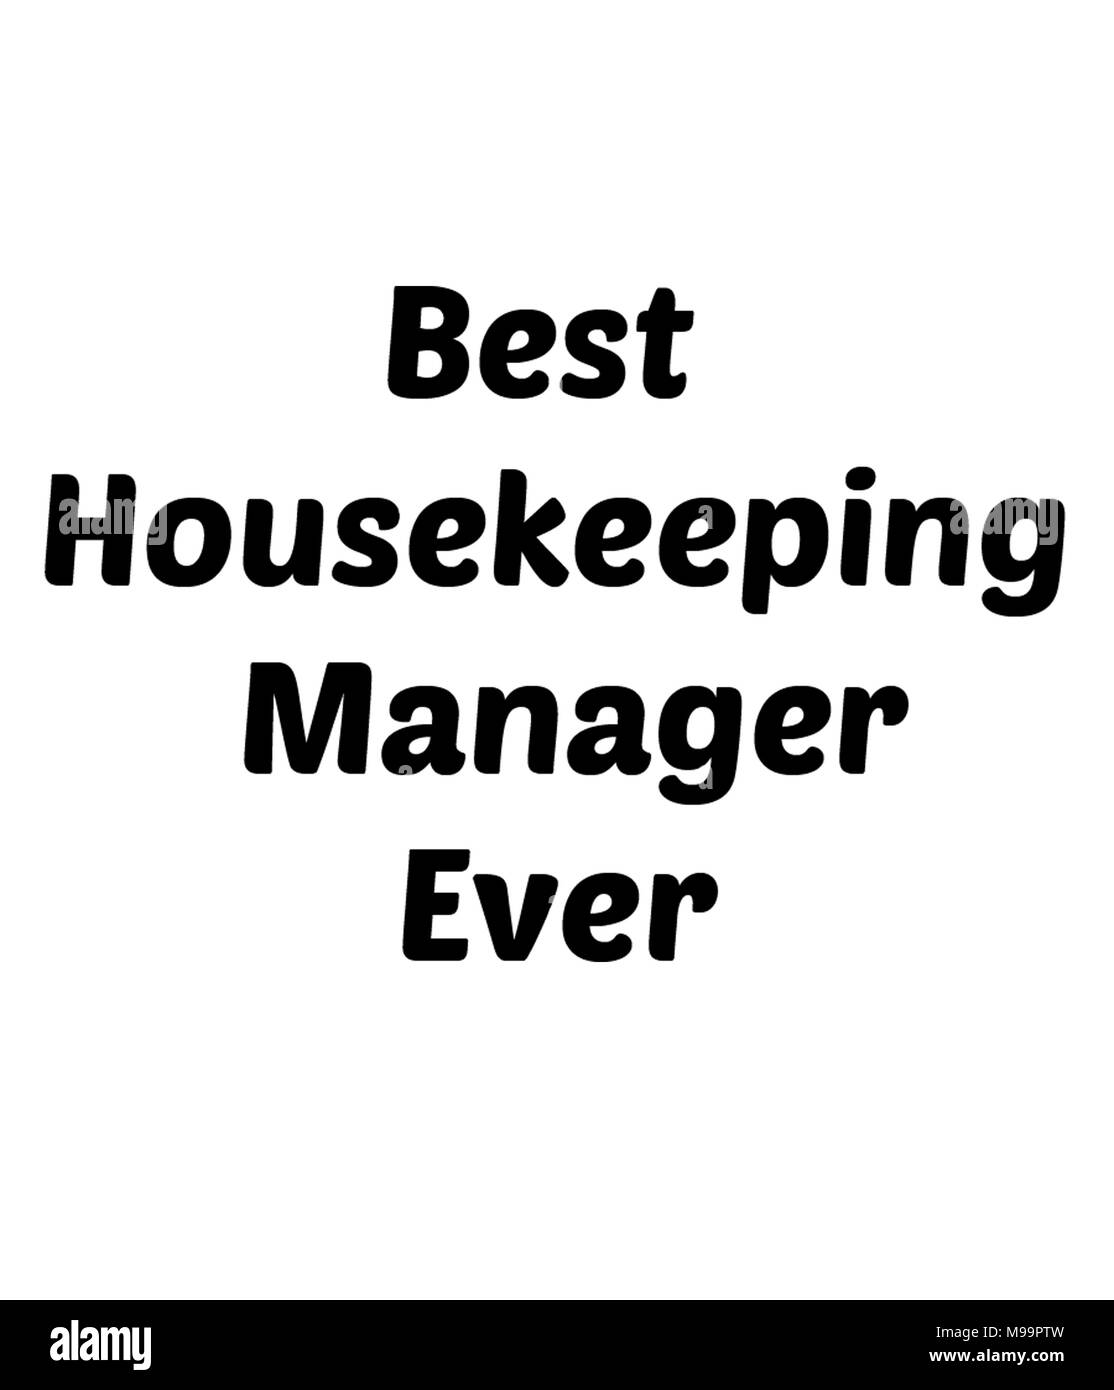 Best Housekeeping Manager Ever Stock Photo